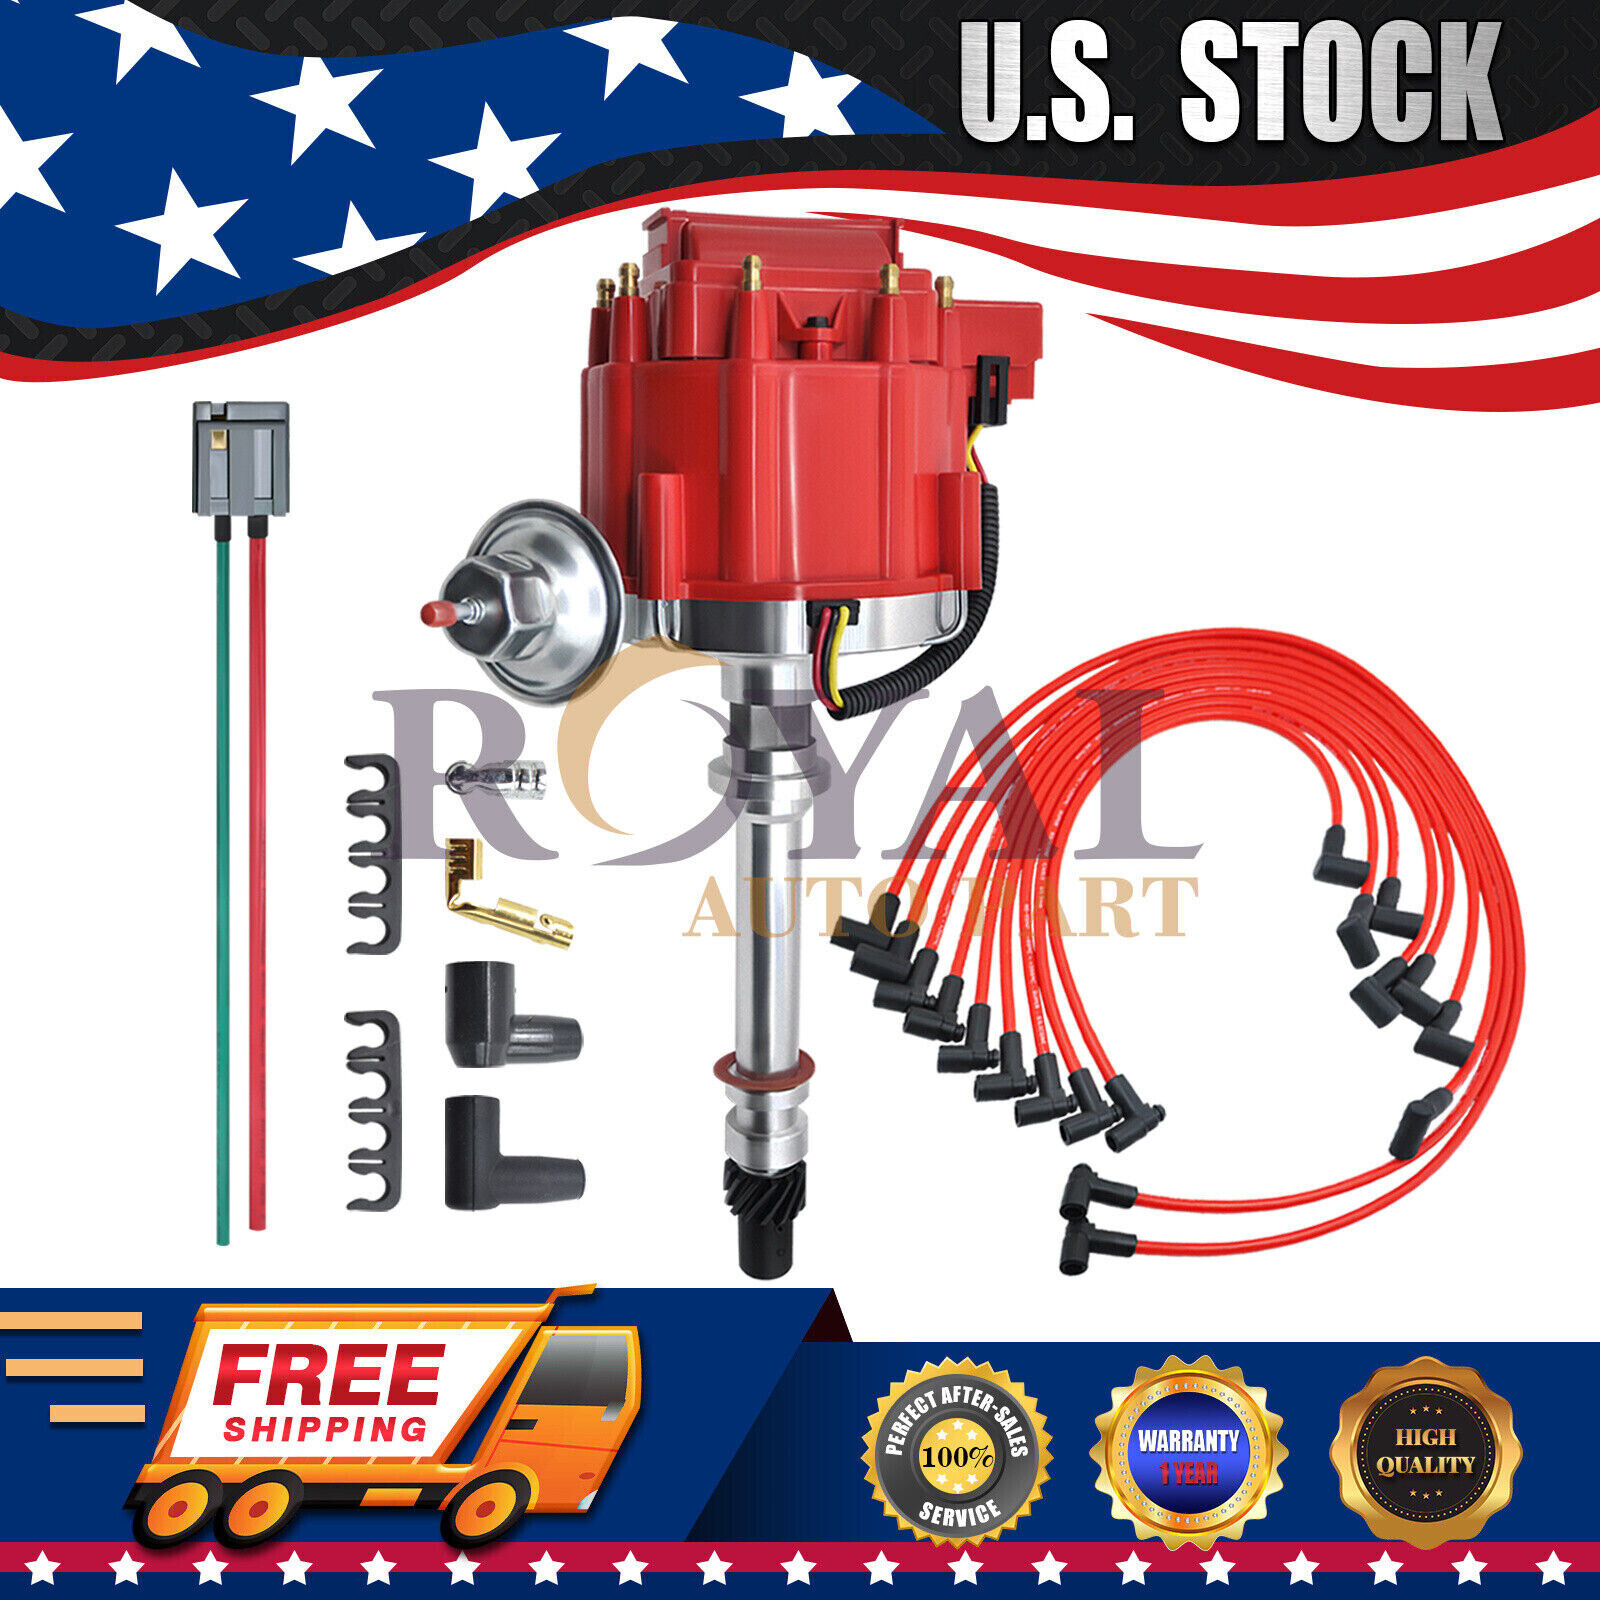 GM08 HEI Distributor &Wire &Pigtail for Chevy 350 454 SBC BBC w/65K Volt 9000RPM